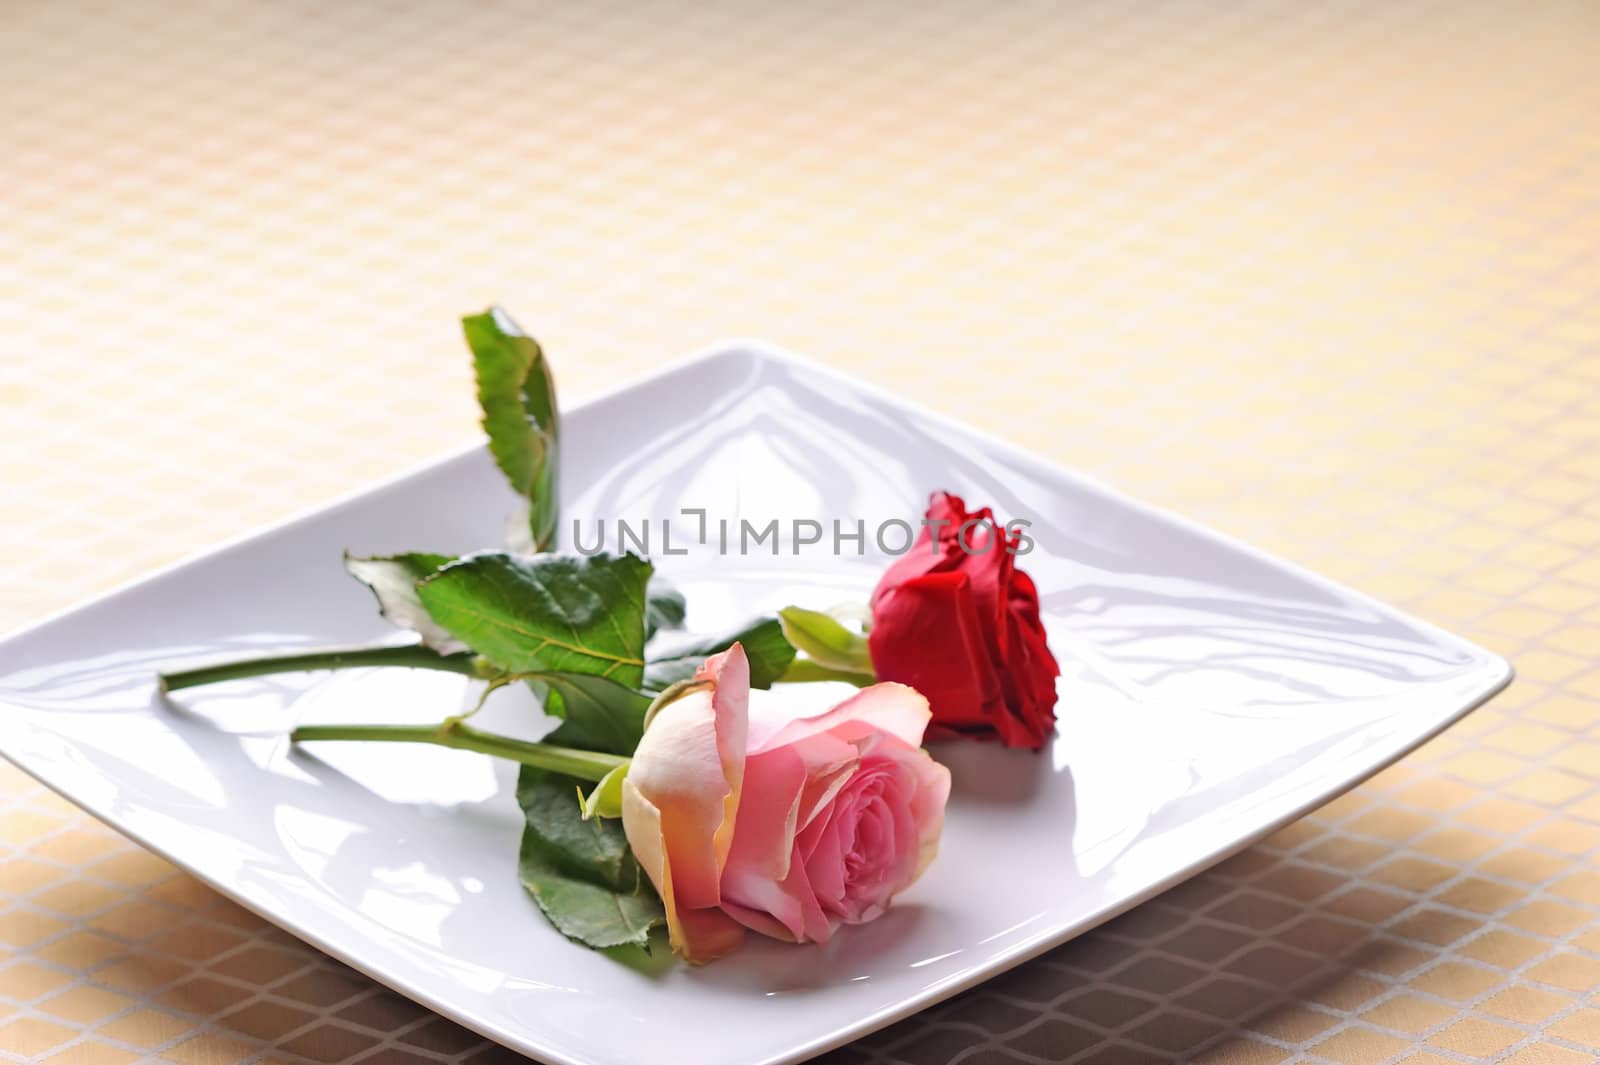 Romantic date with two roses in the plate